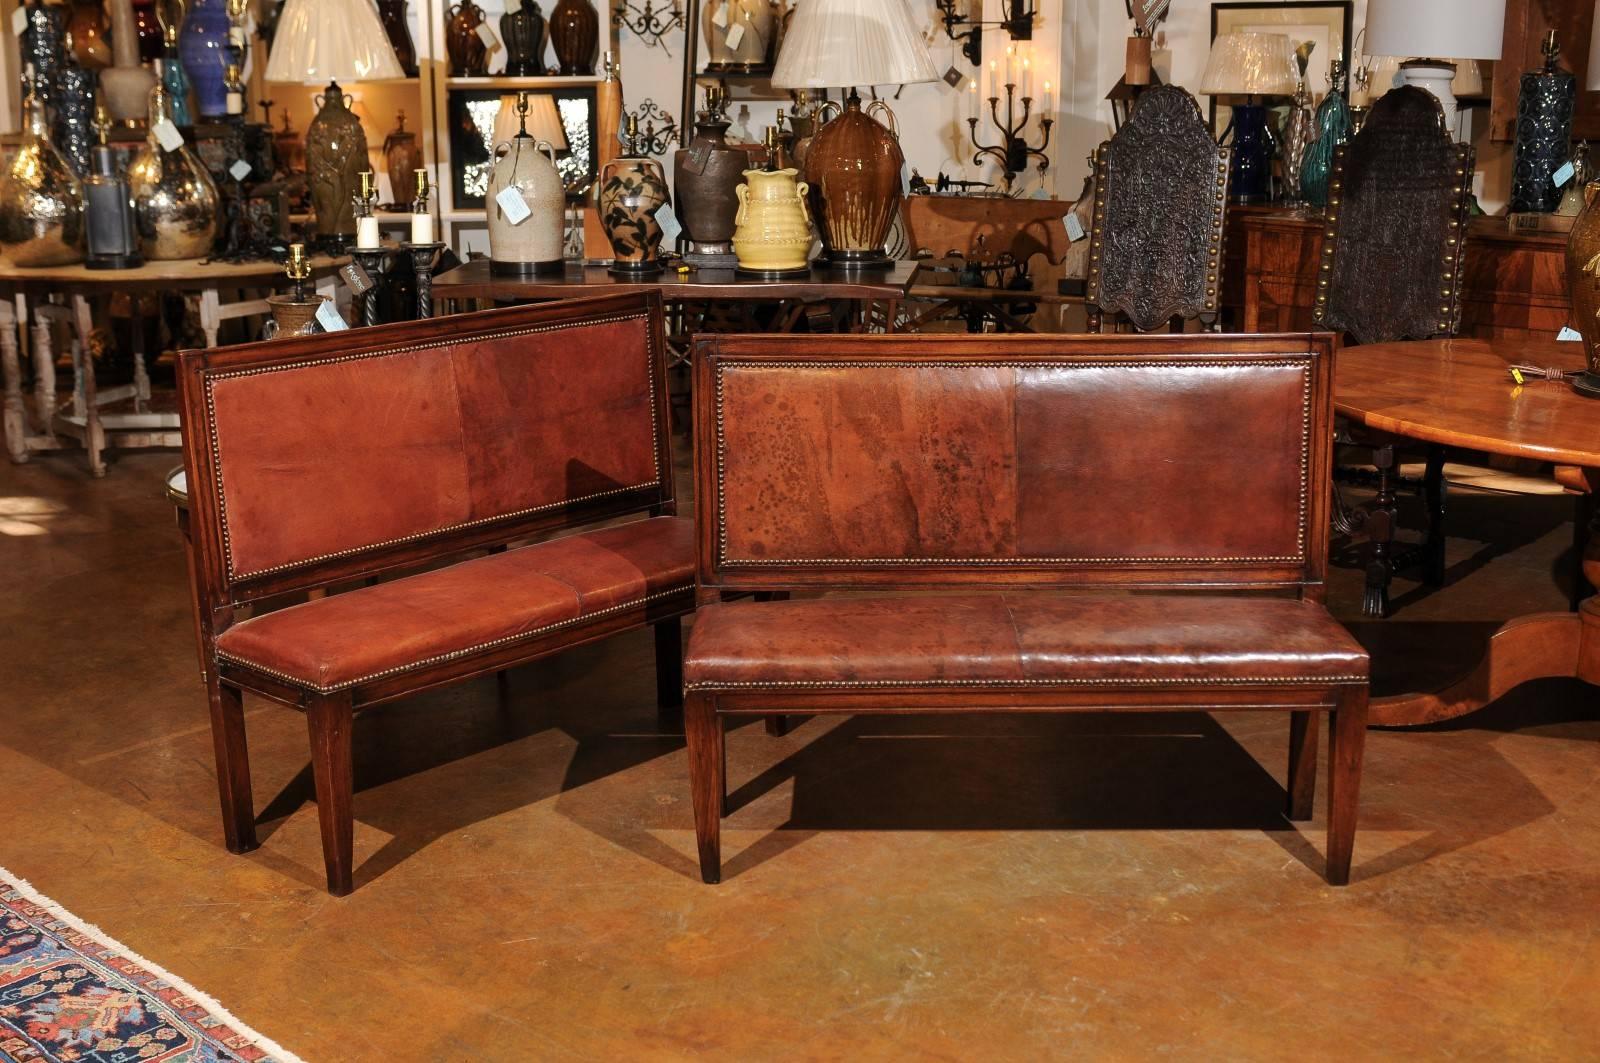 This English mahogany hall bench from the 19th century is fitted with leather on the backrest and seat, secured with a nailhead trim. The simple, rectangular back is raised on straight legs, while in front the seat rests on slightly tapered legs.